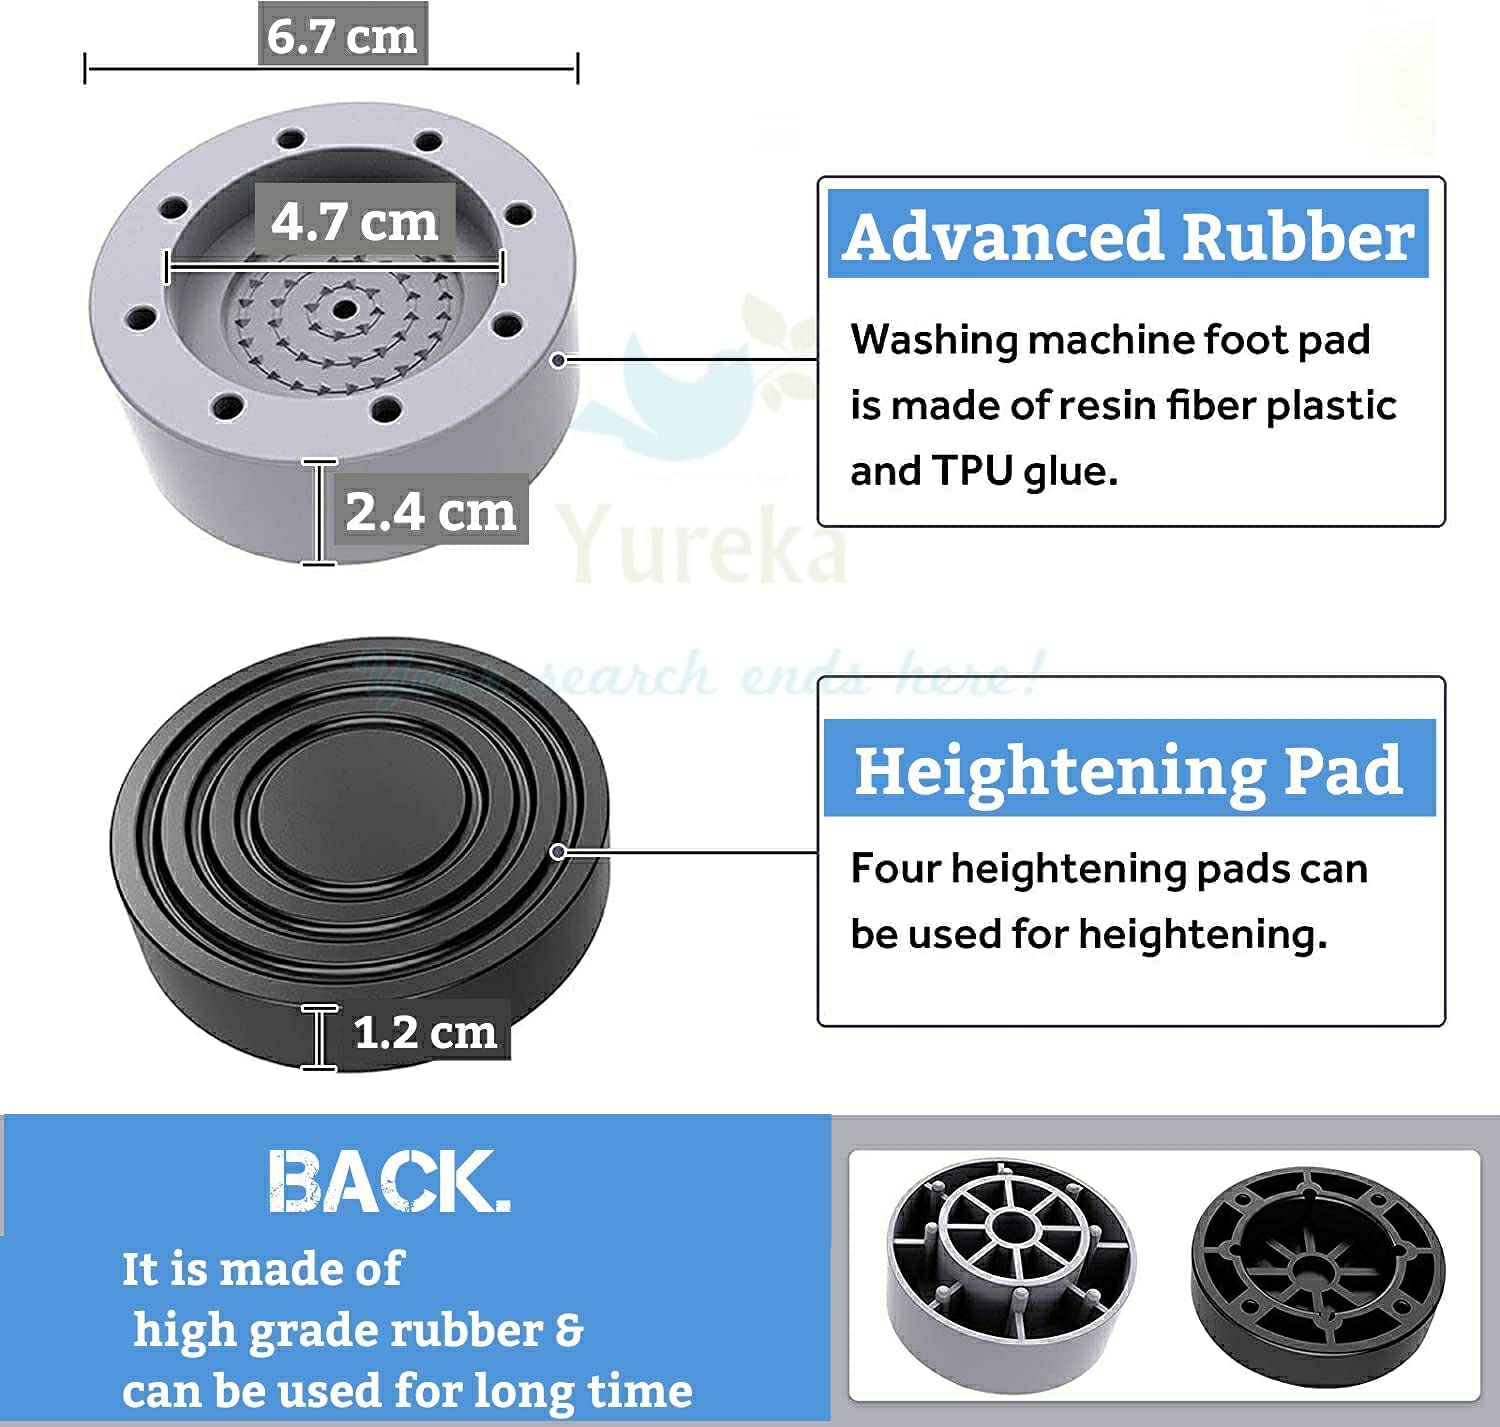 4 Pices Multi-Purpose Anti Vibration Pads for Washing Machine Pan, Noise Dampening Washing Machine Feet with Tank Tread Grip for Washer and Dryer, Protects Laundry Room Floor for Home Appliances